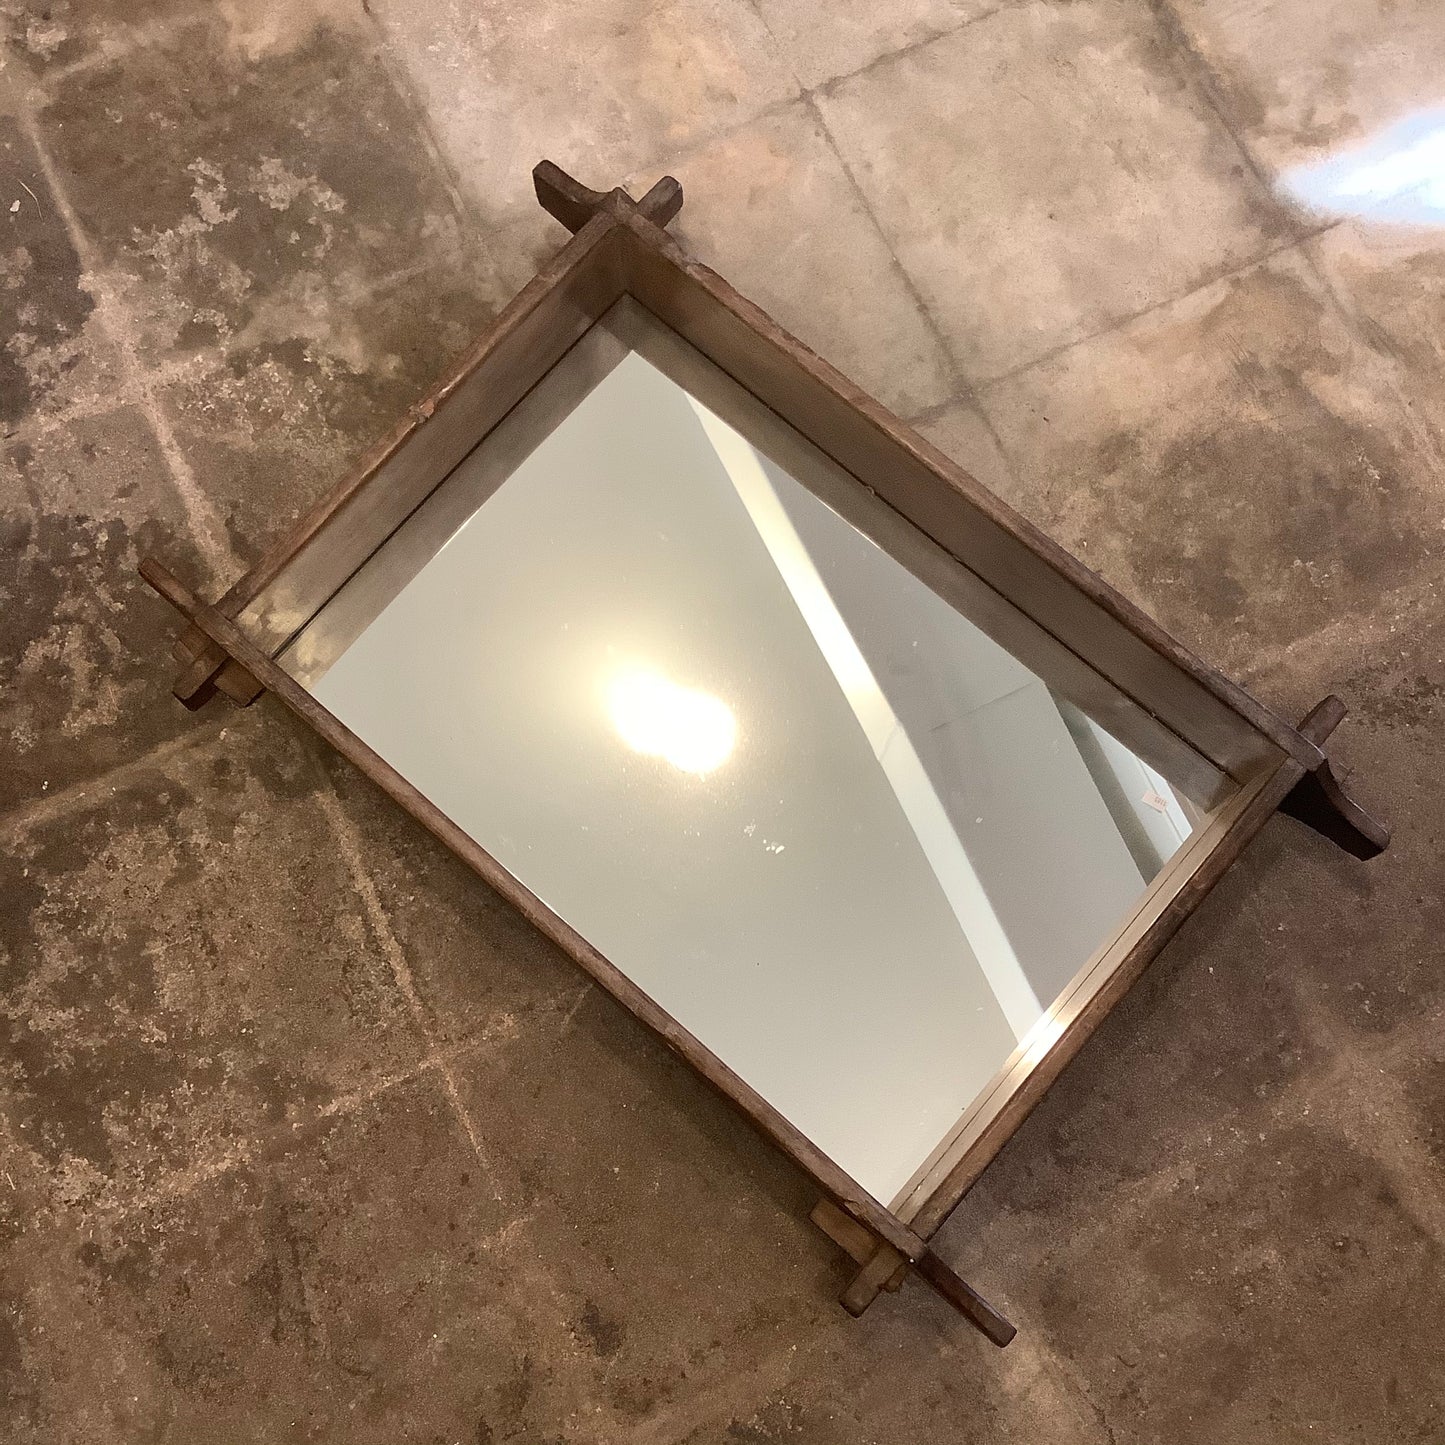 Wooden Adobe Mold - Turned Mirror from Guatemala